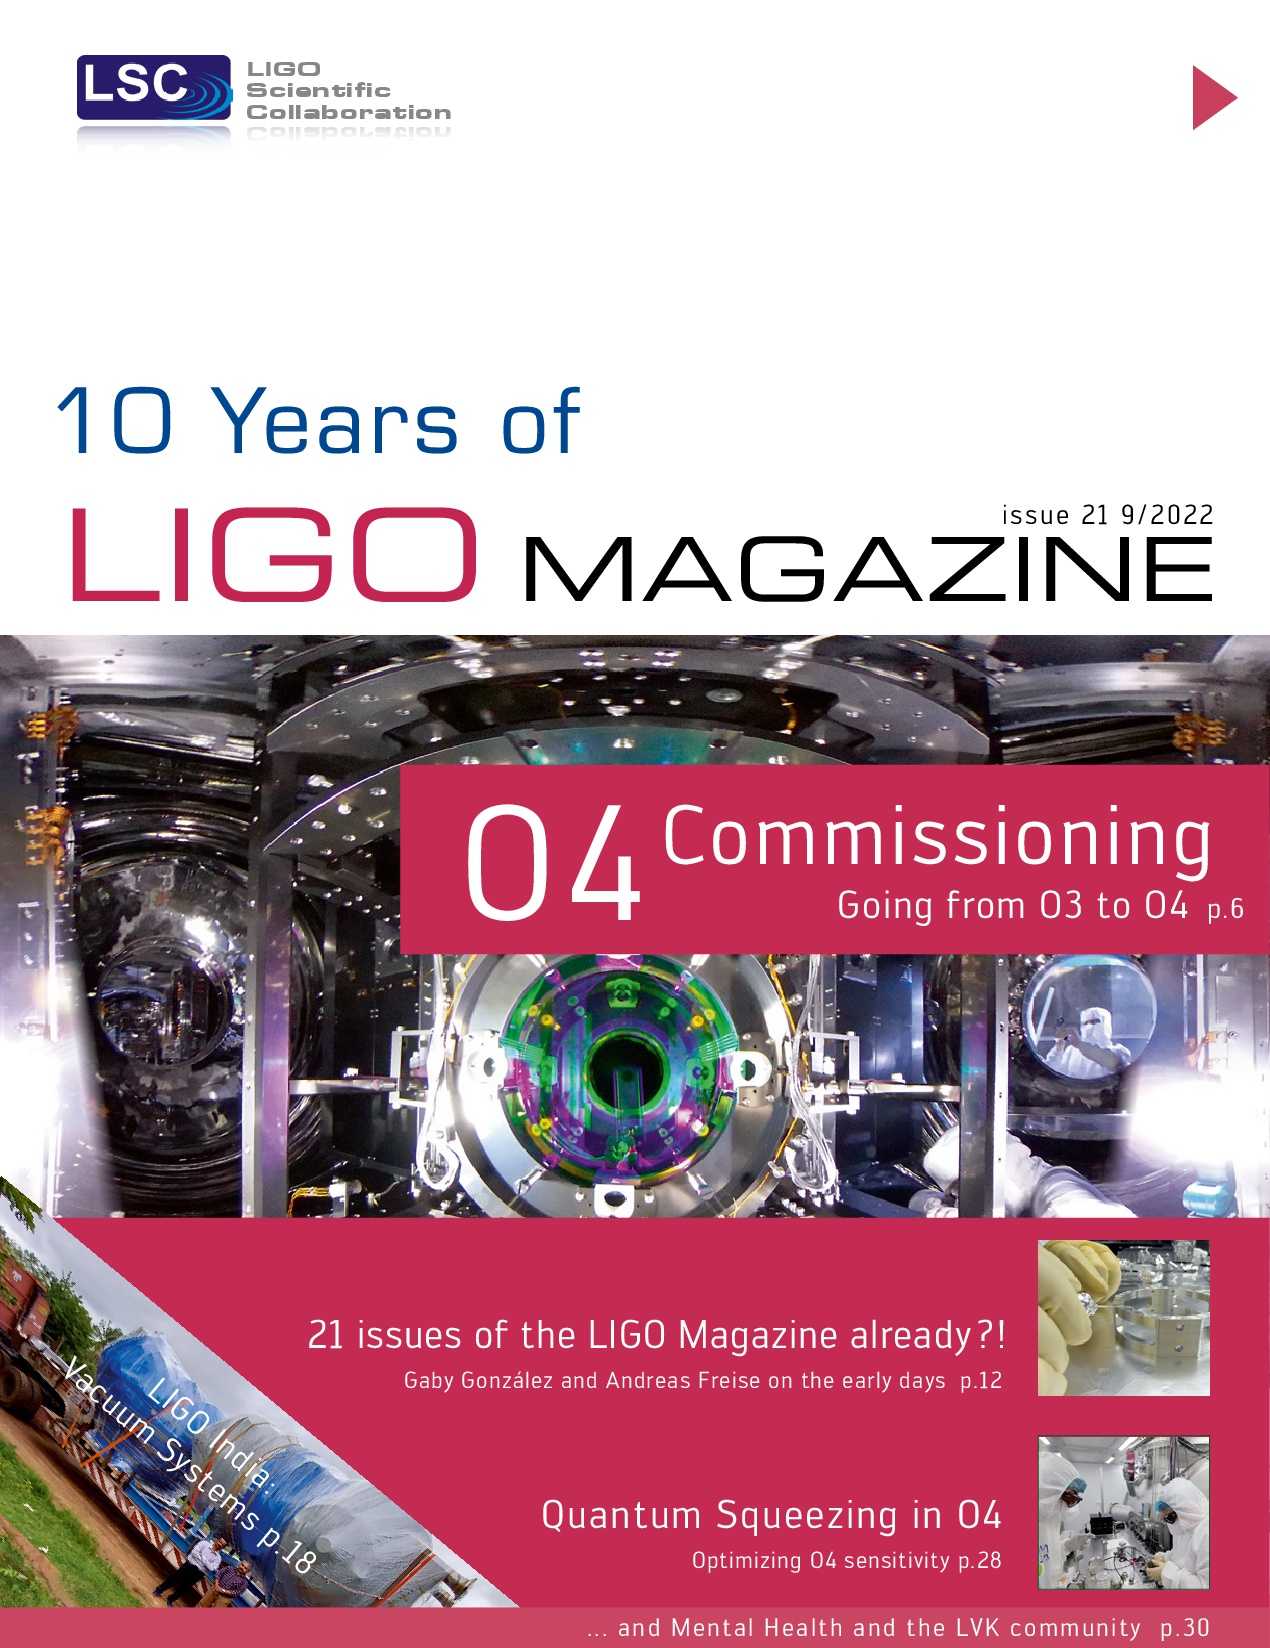 News-Image 26 of: New LIGO Magazine Issue 21 is out